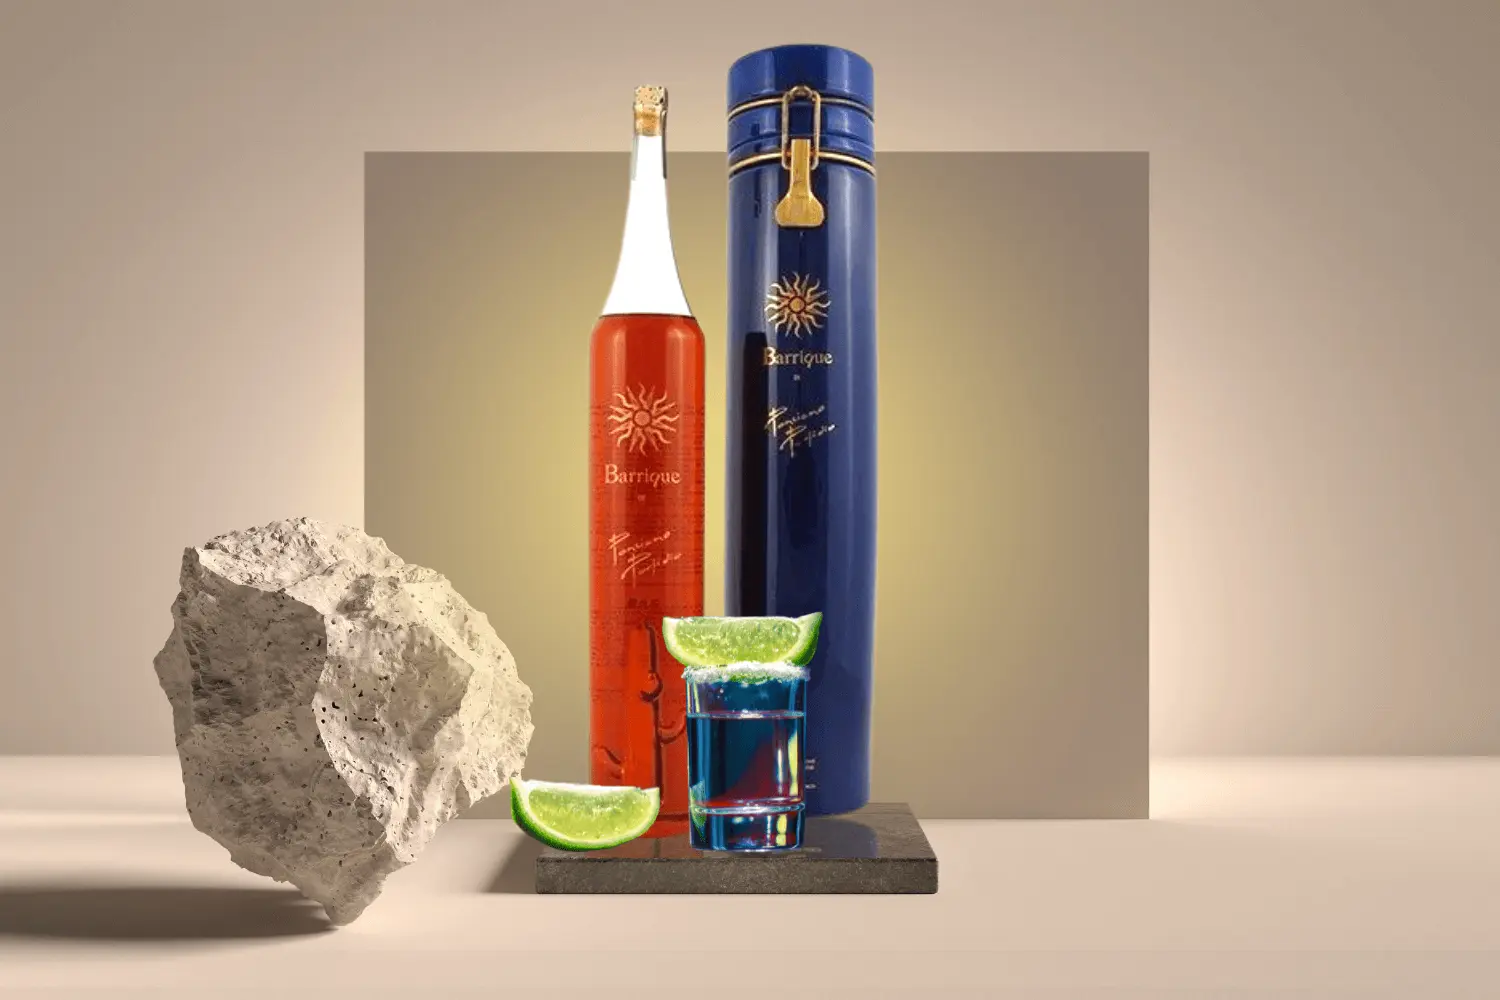 Barrique de Ponciano Porfidio is one of the most expensive bottles of tequila in the world. Find out what else made the list. 